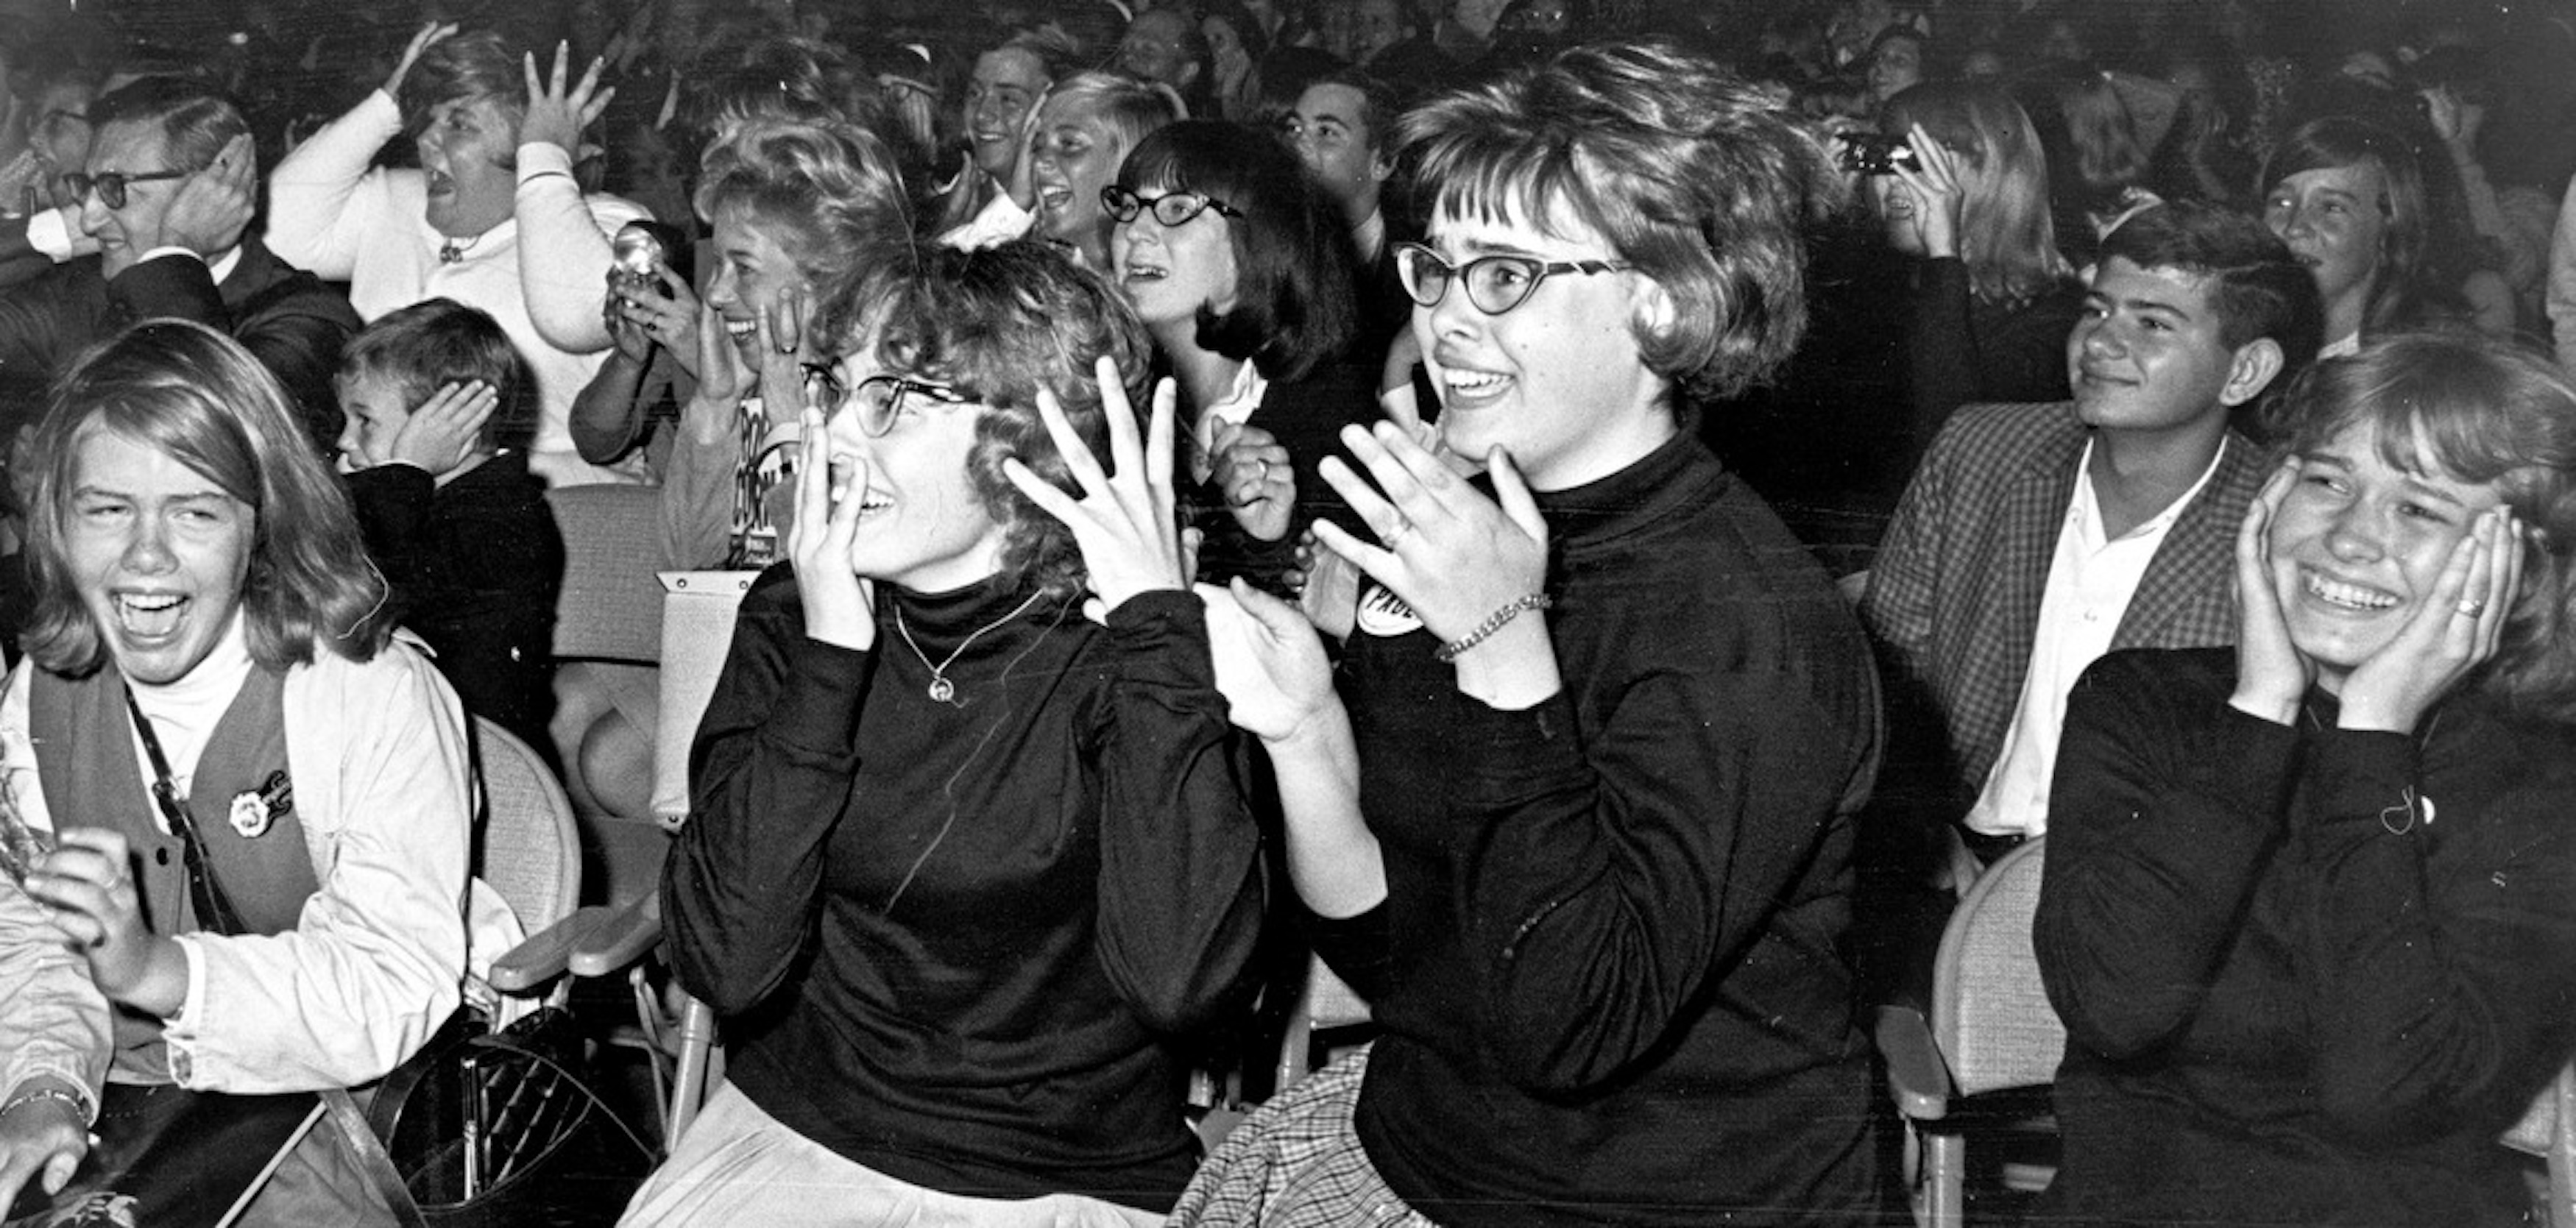 Fans of the Beatles go nuts during a concert in the late 1960s.